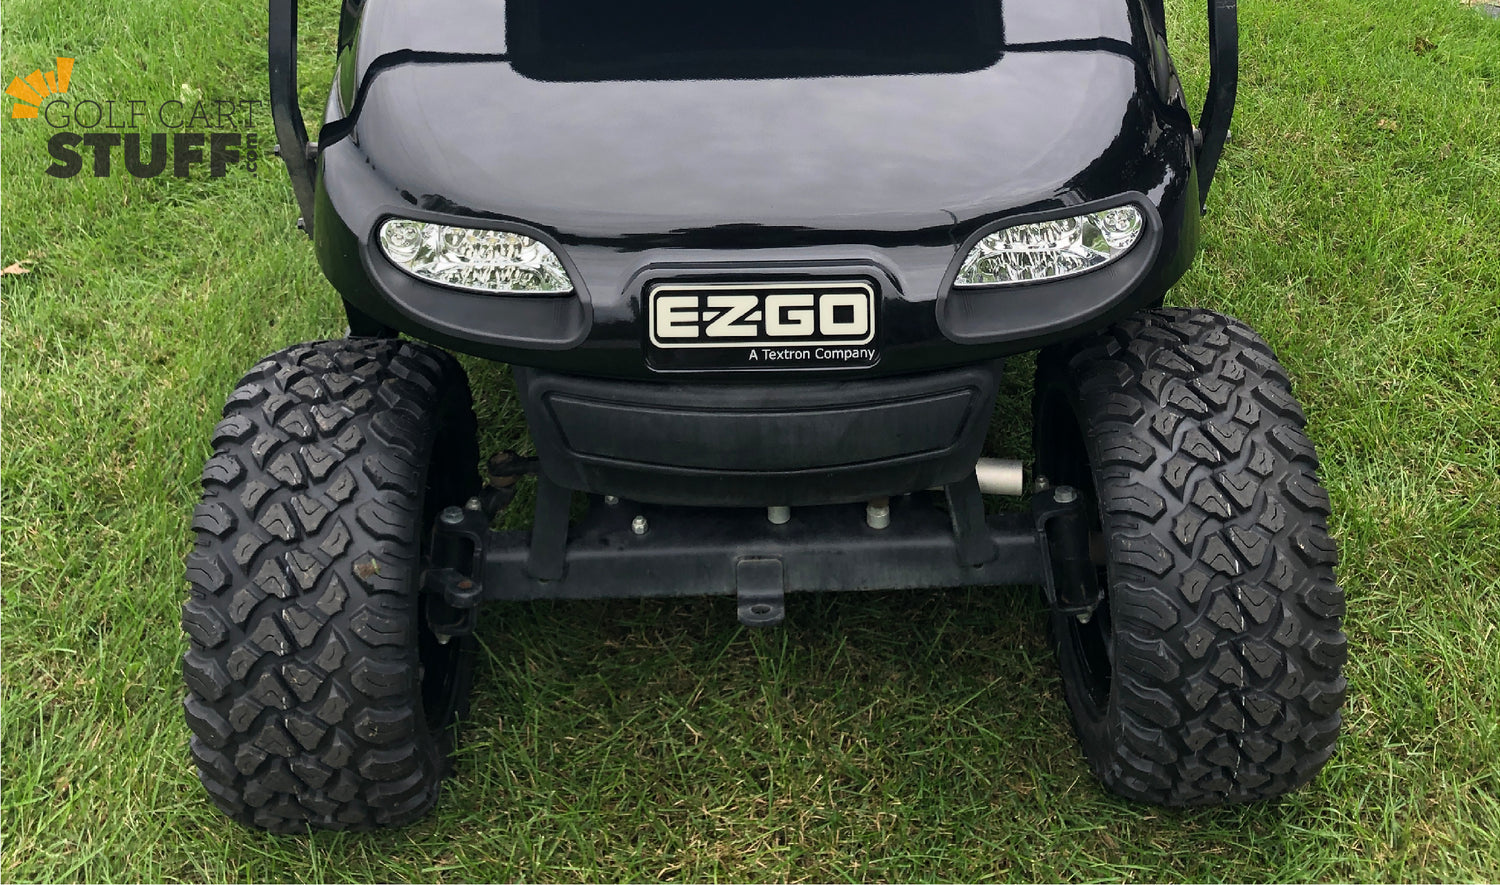 EZGO TXT Valor with a lift kit and lights installed